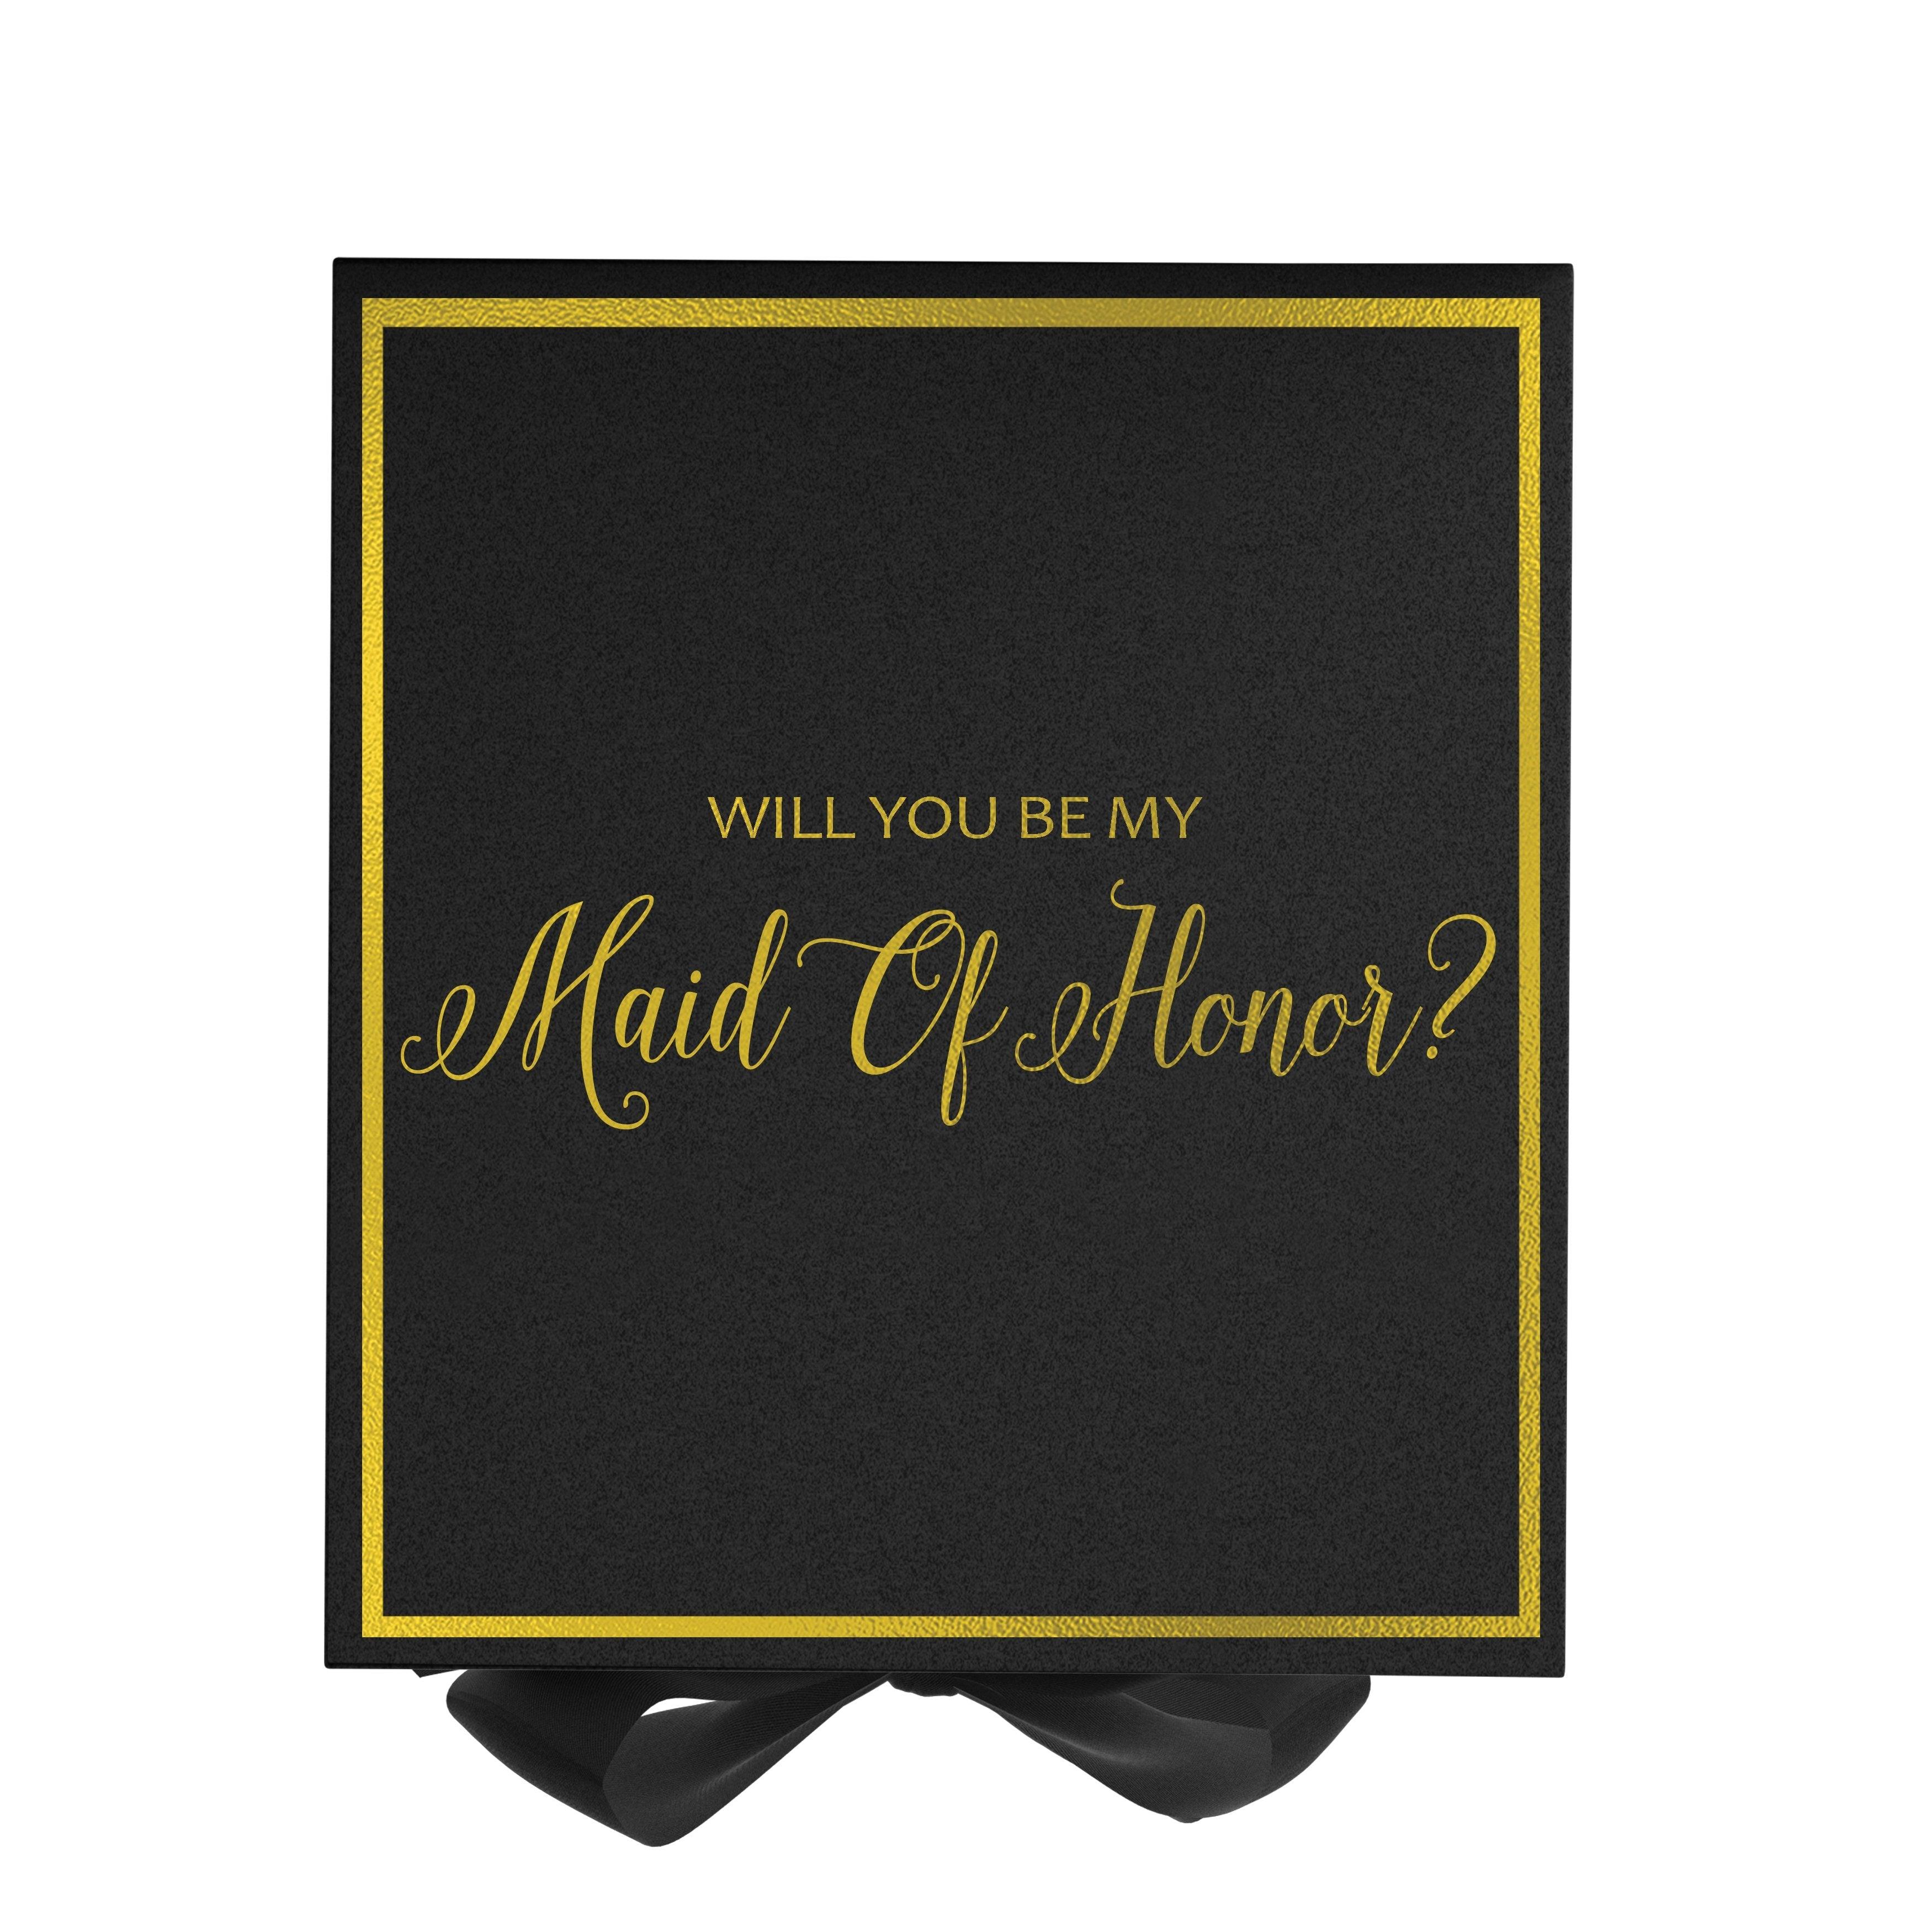 Will You Be My maid of honor? Proposal Box black - Border by Tshirt Unlimited - Vysn